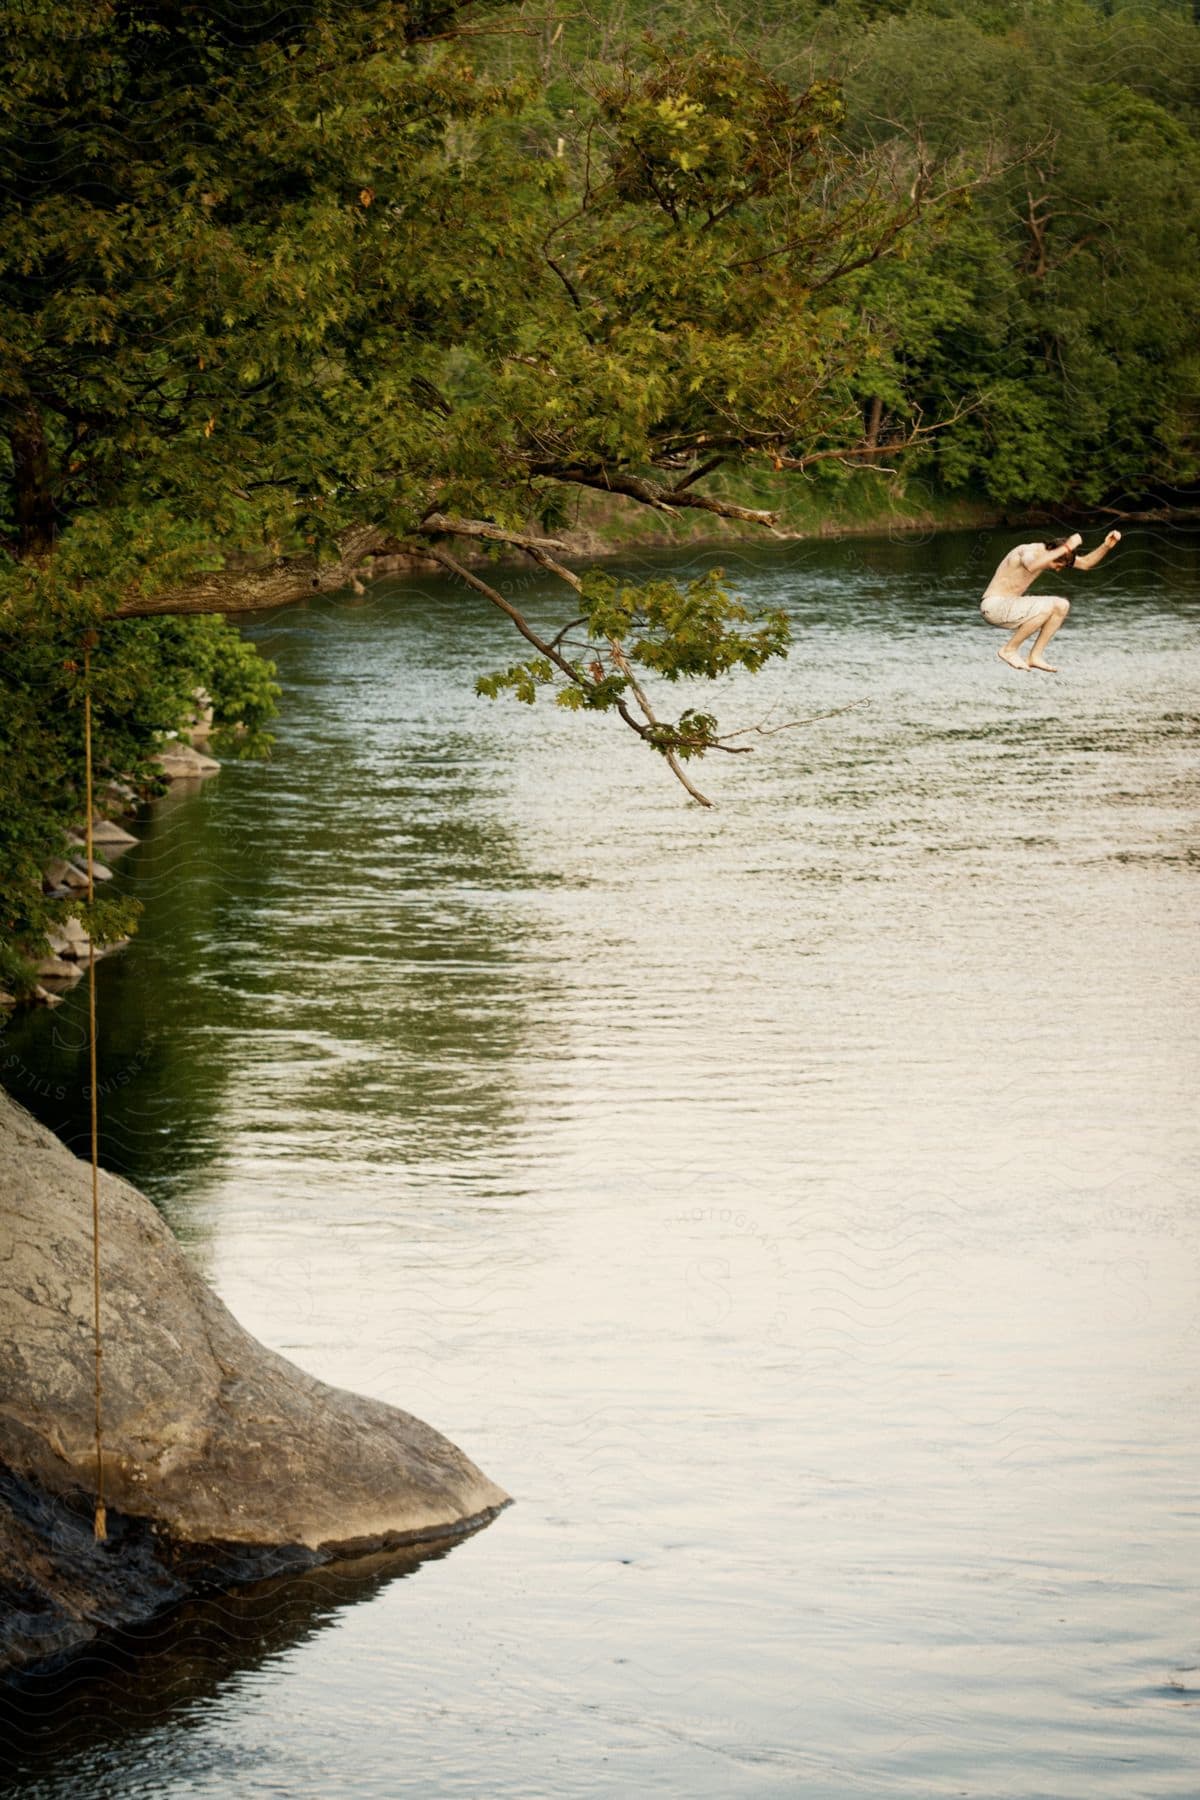 A man jumps off a cliff into a lake wearing shorts